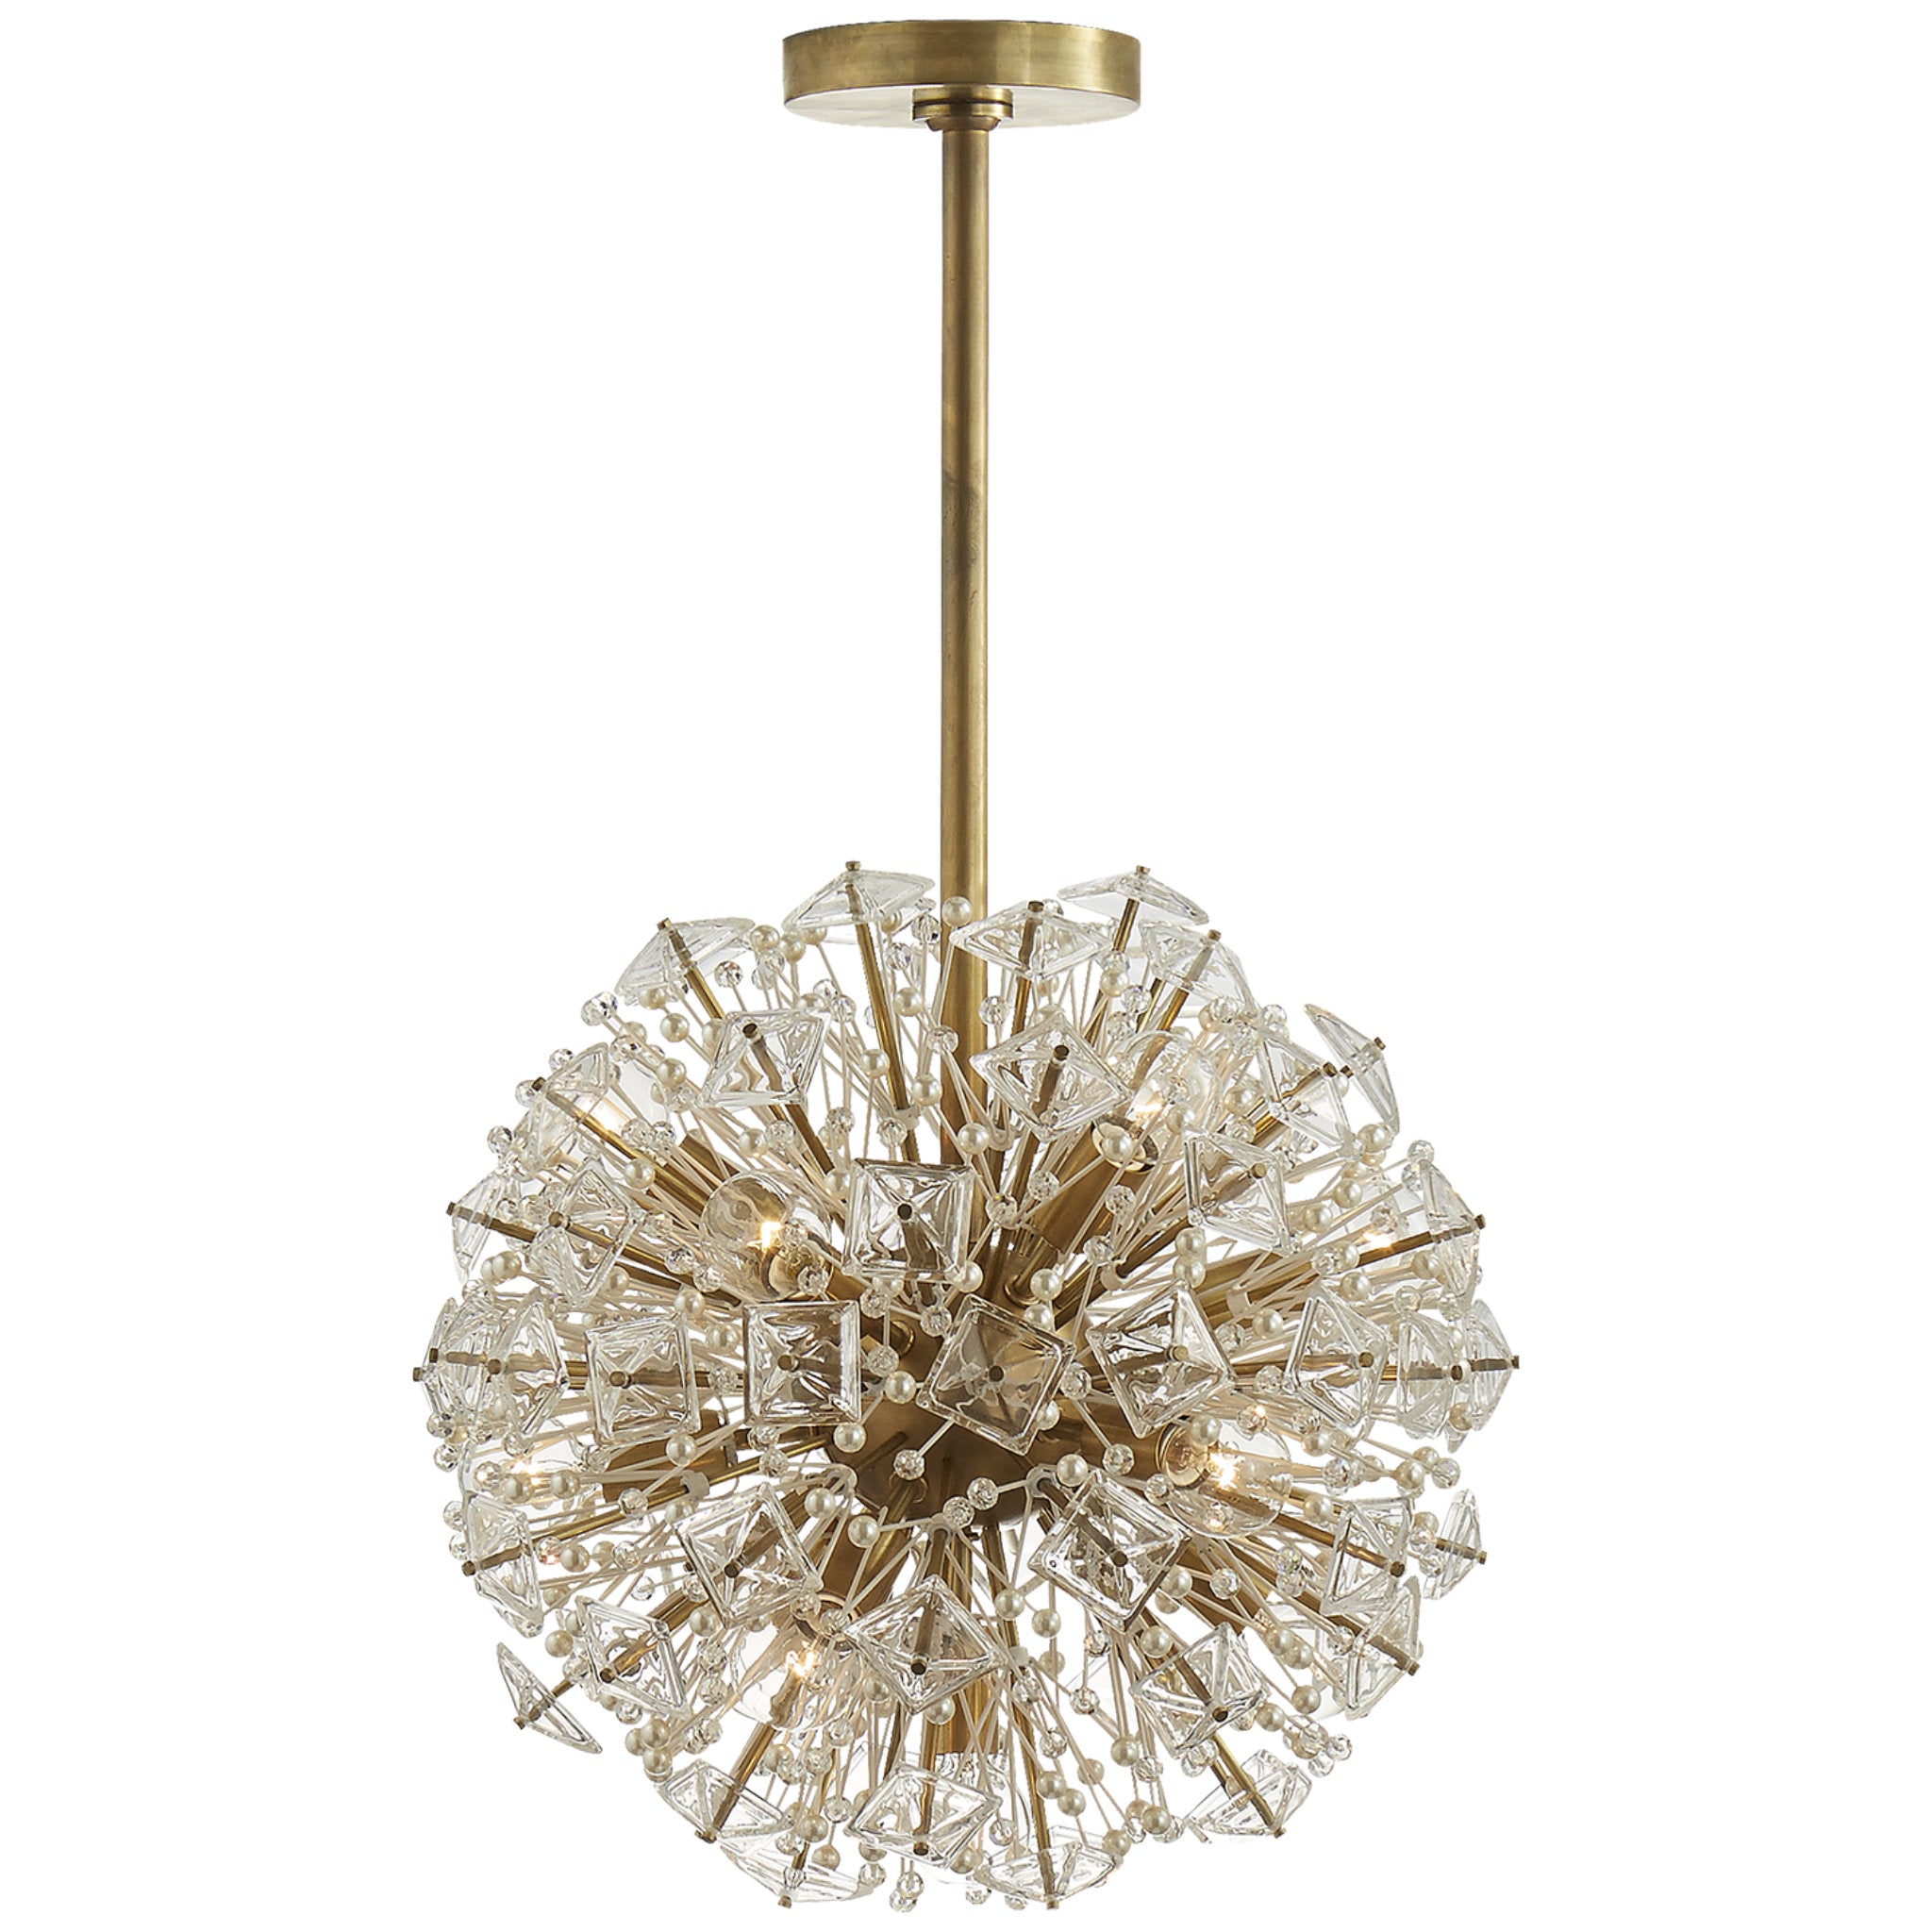 kate spade new york Dickinson Small Chandelier in Soft Brass with Clear Glass and Cream Pearls